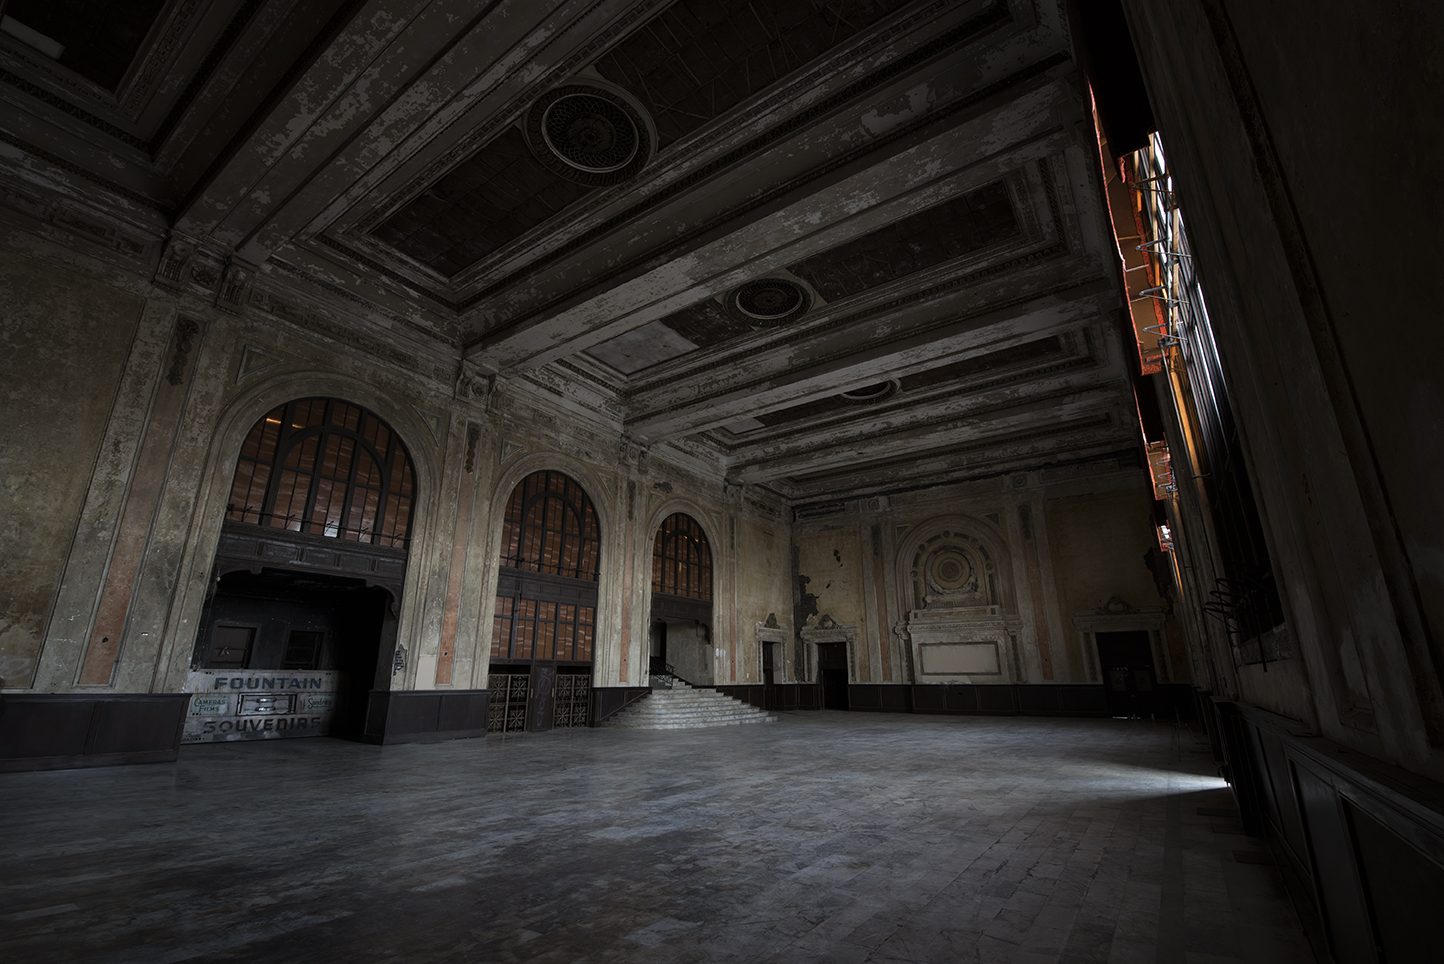 Inside the old abandoned Oakland 16th street grand train station